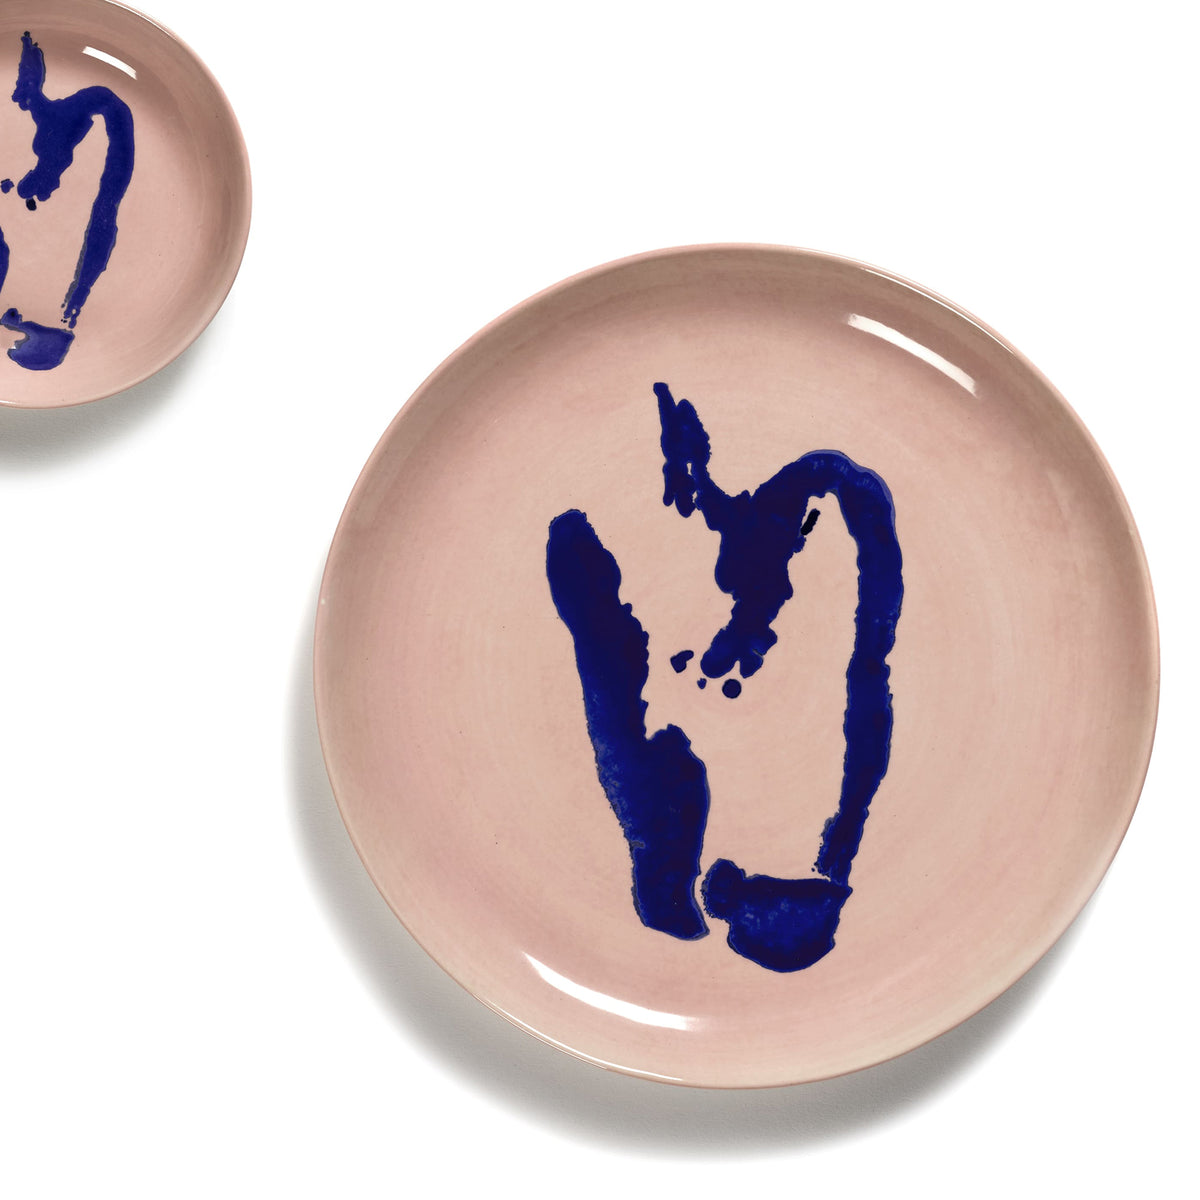 Pink Dish with Blue Pepper Motif - S